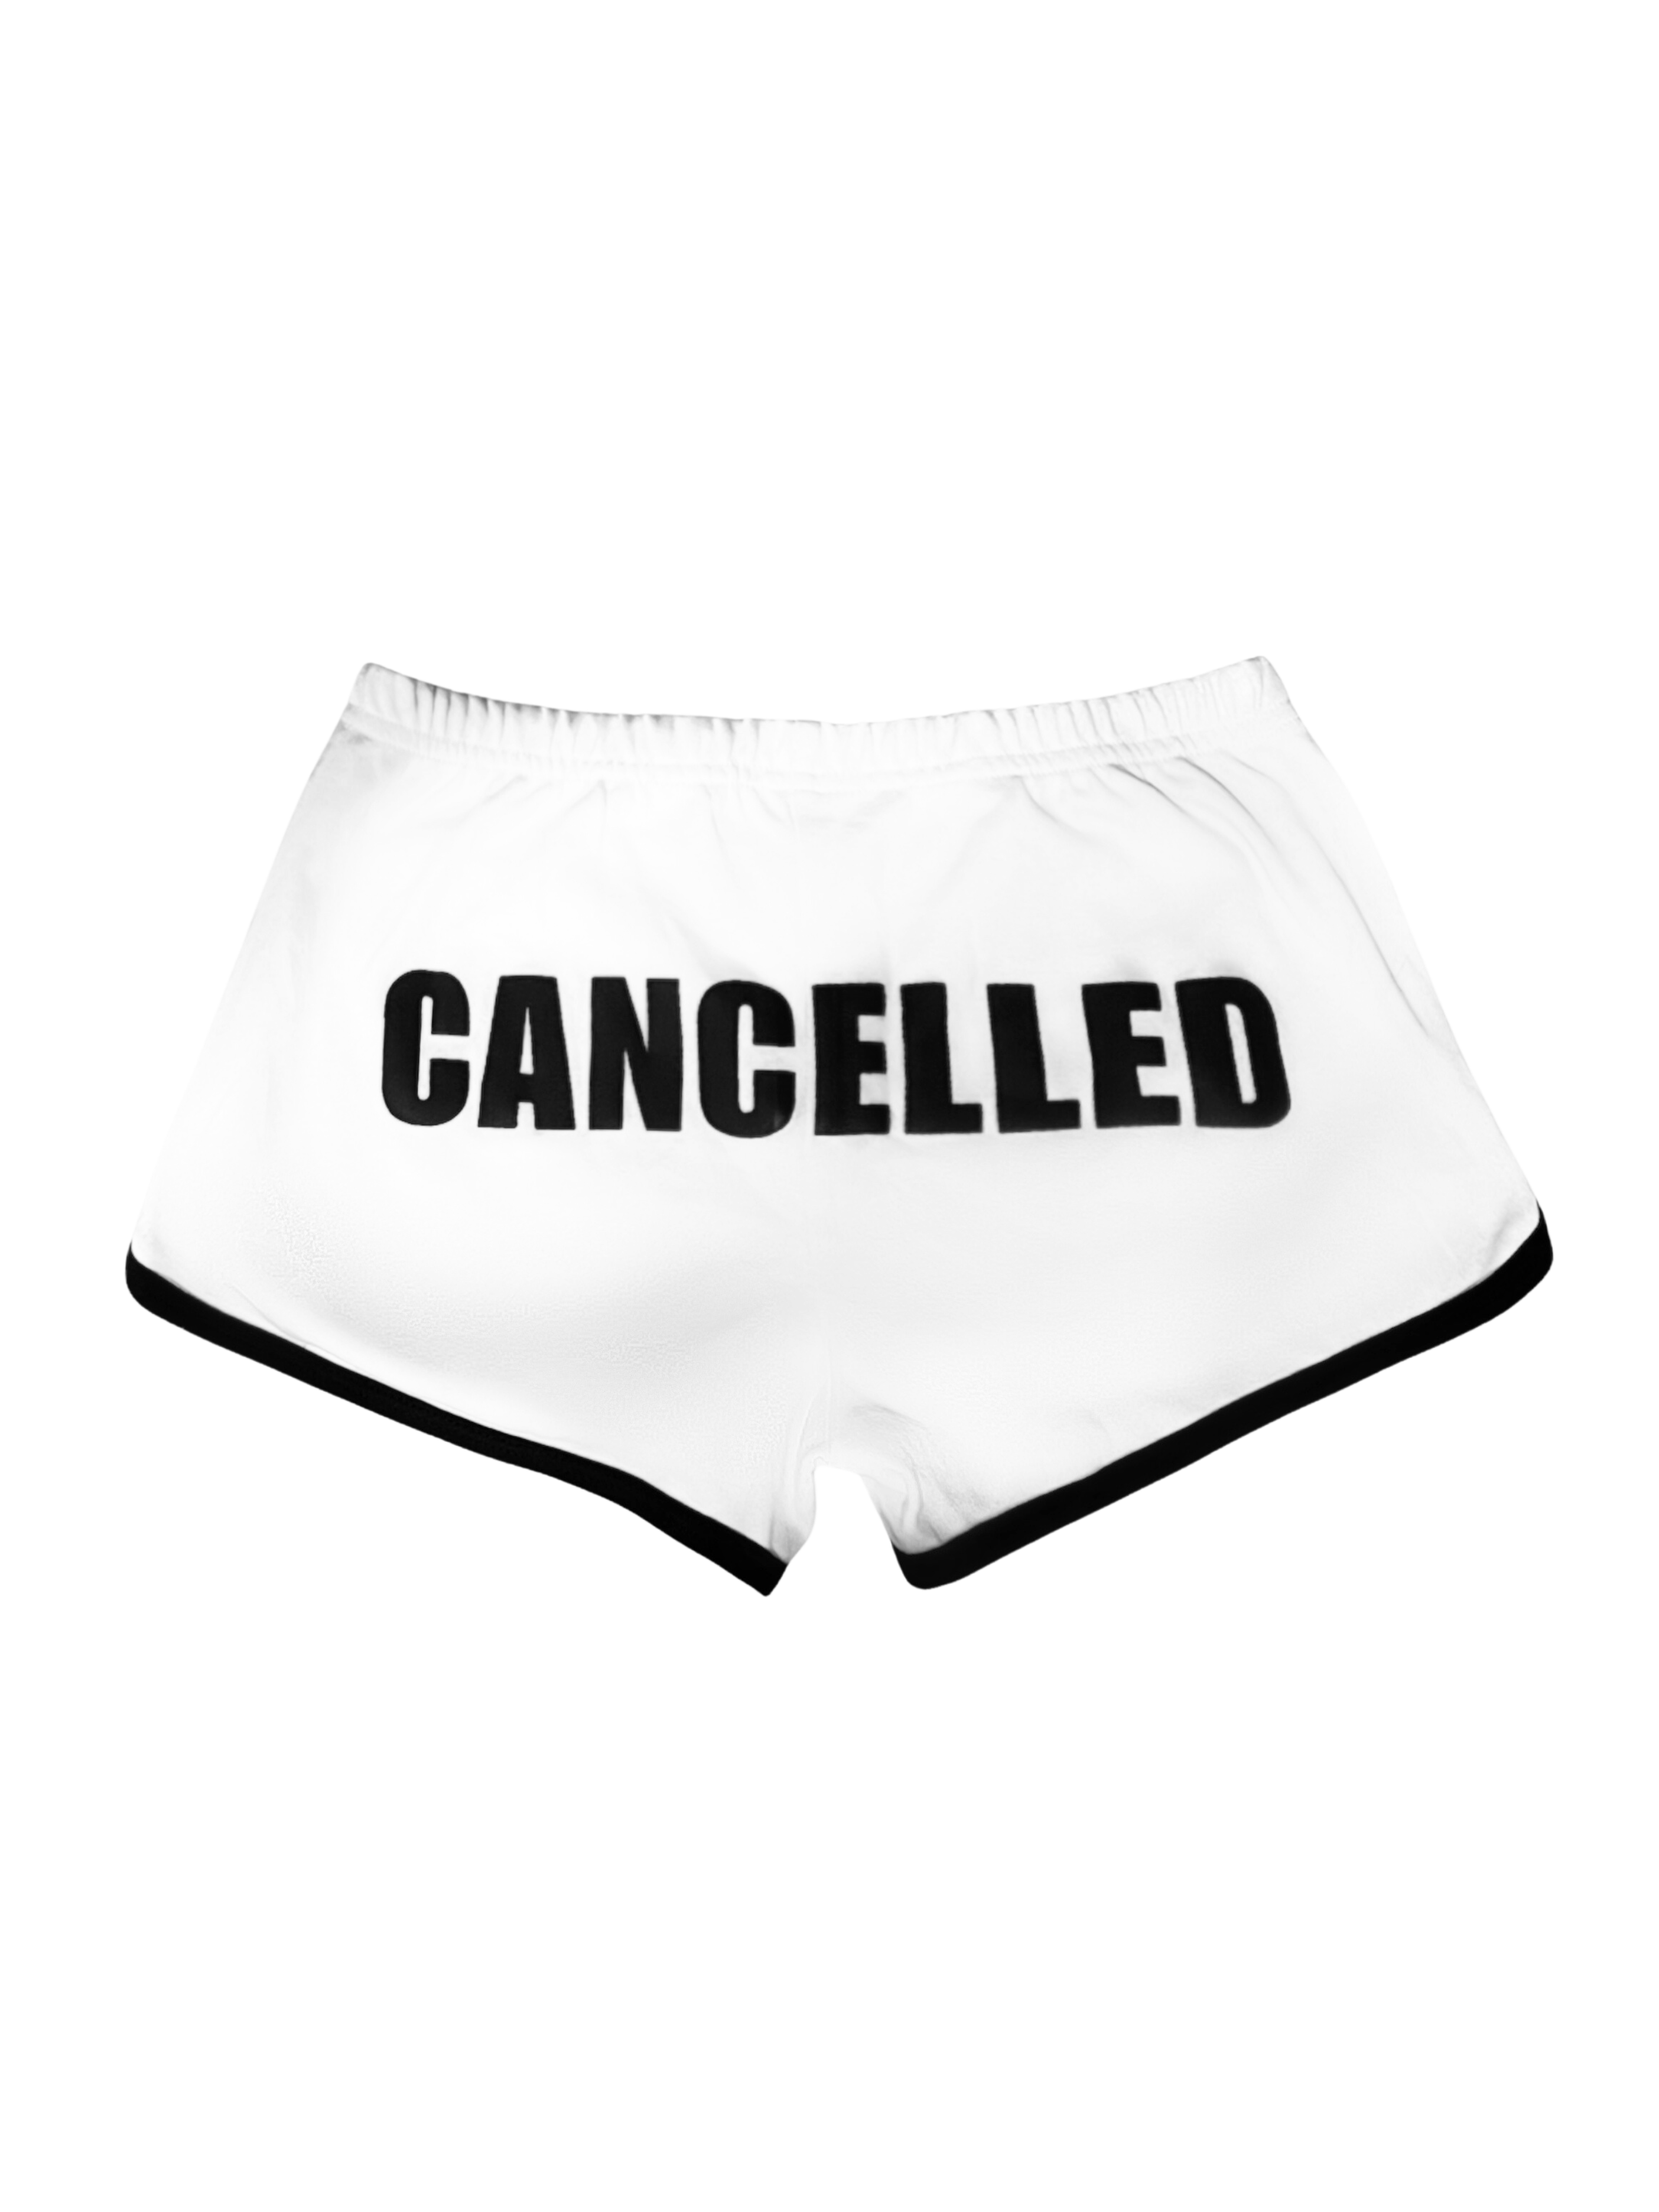 Cancelled Shorts